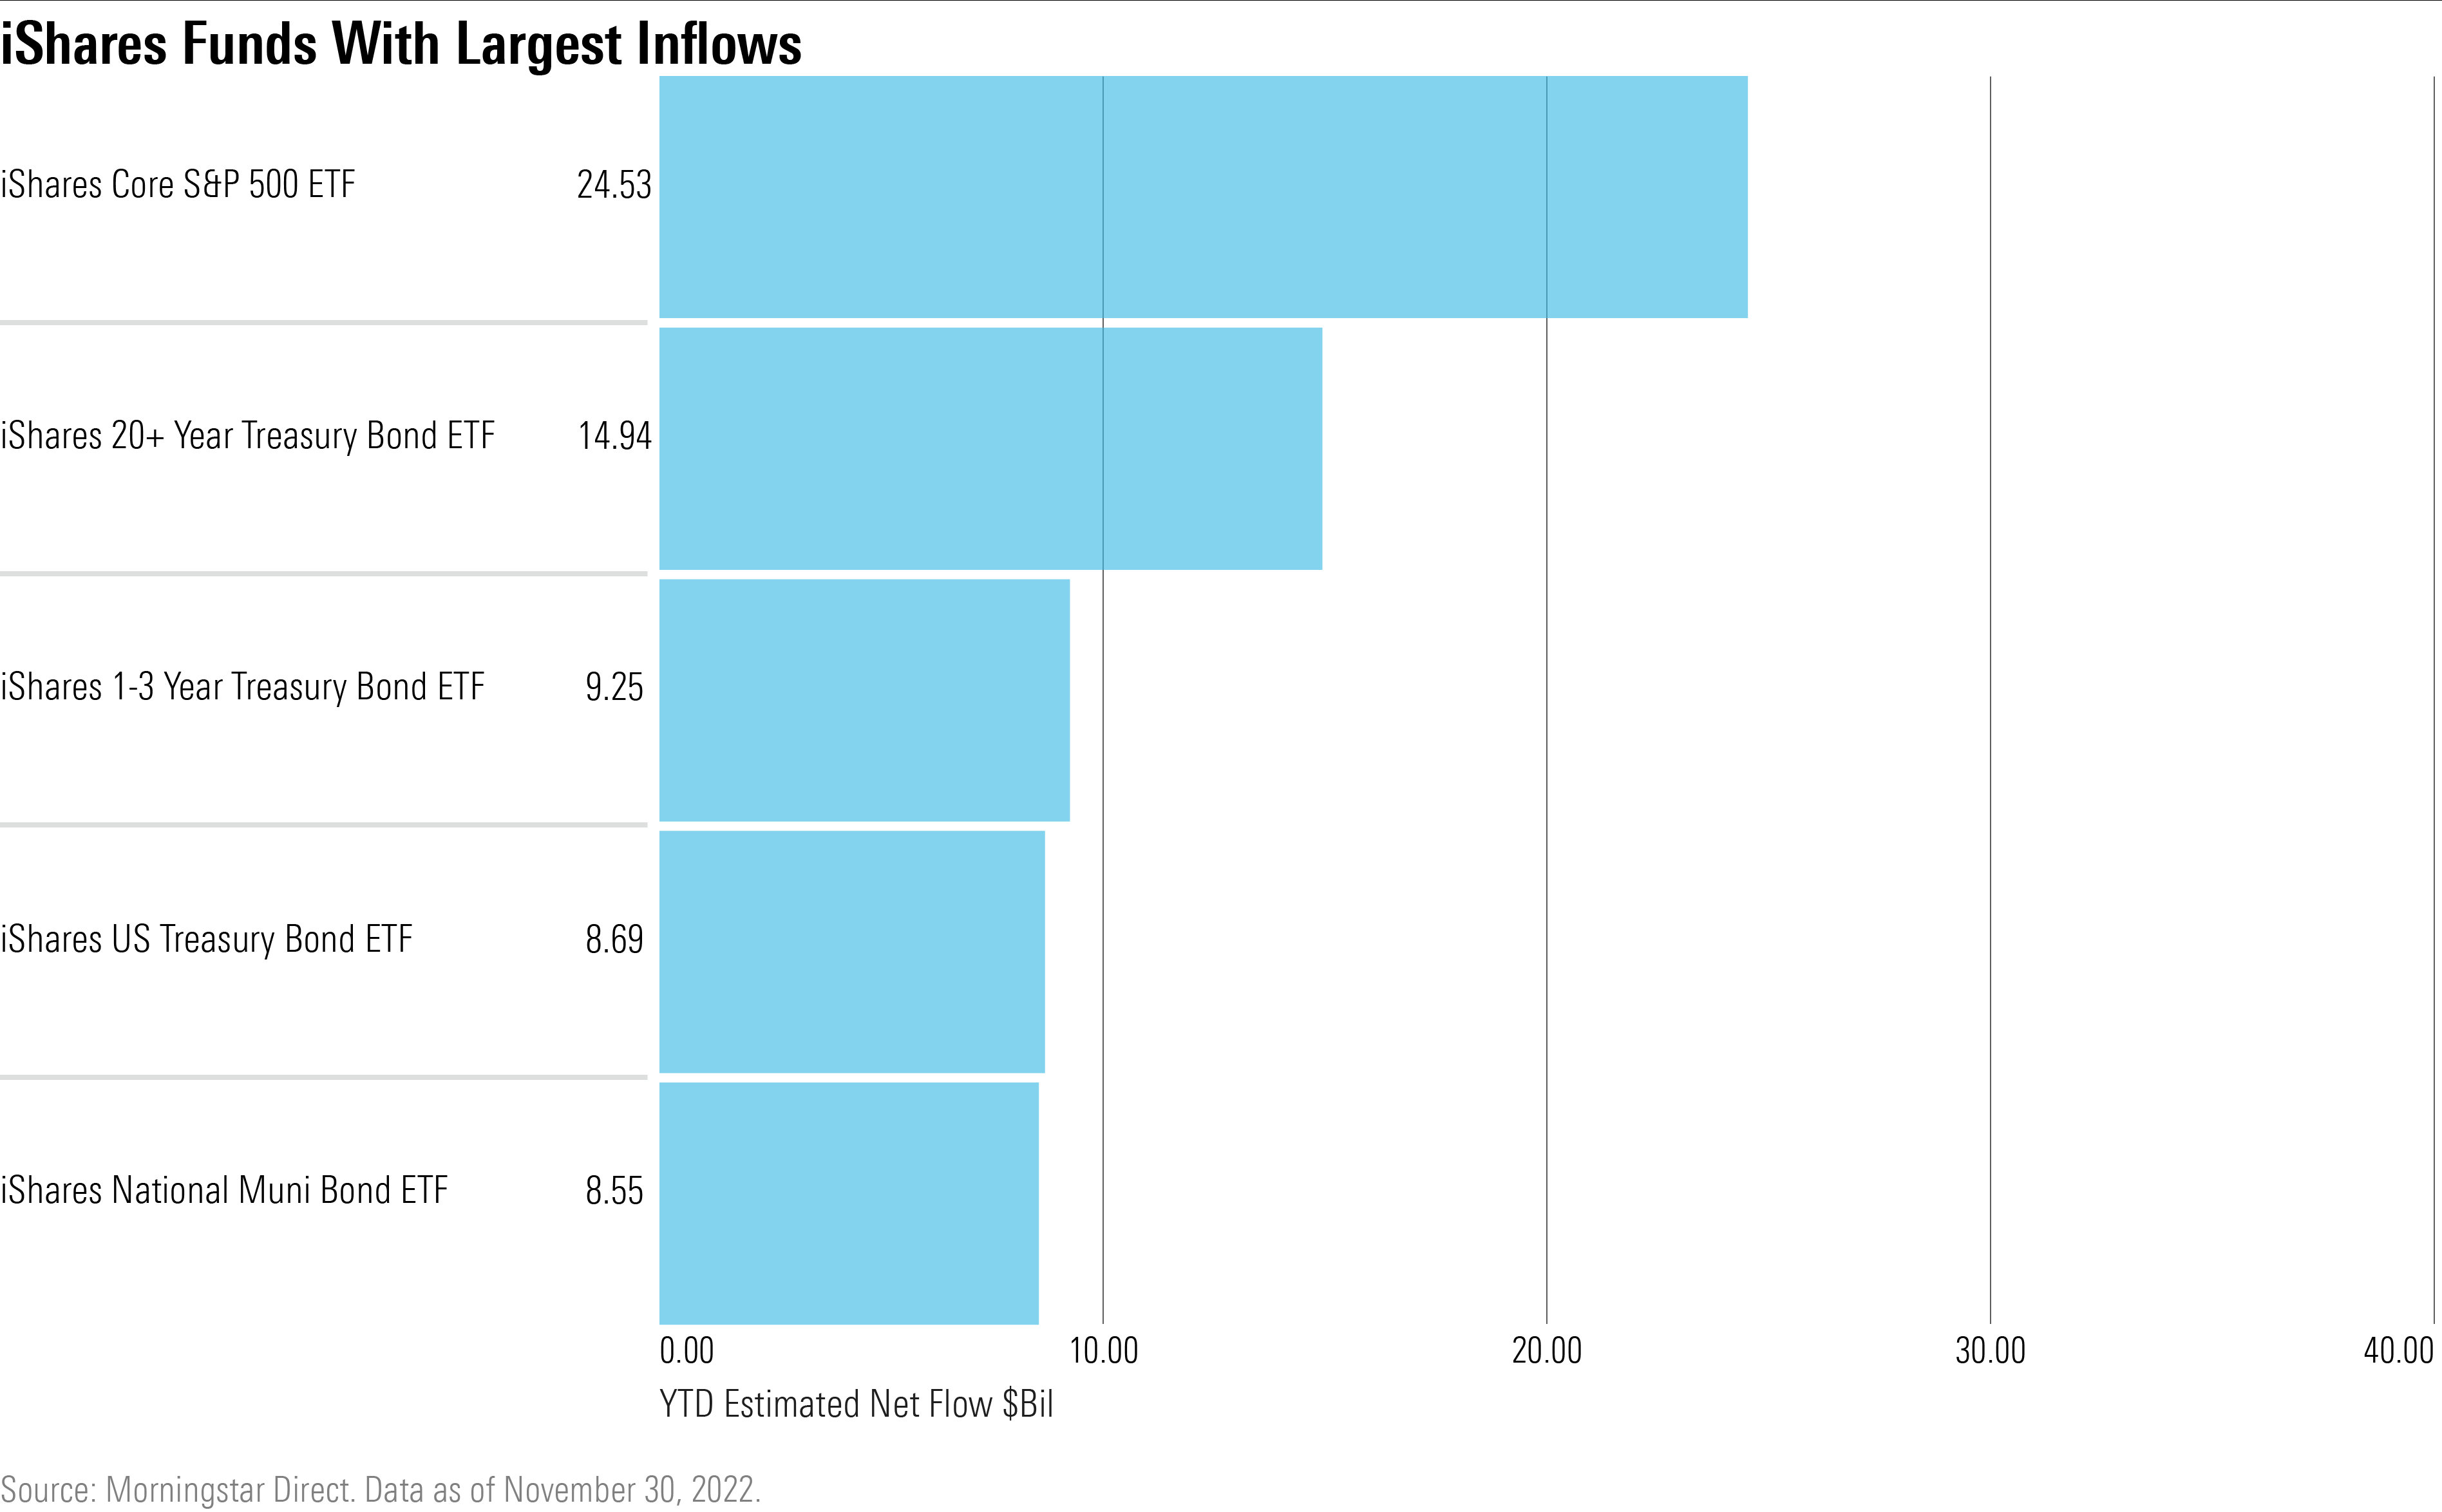 Bar chart of the iShares ETF's with most inflows in 2022